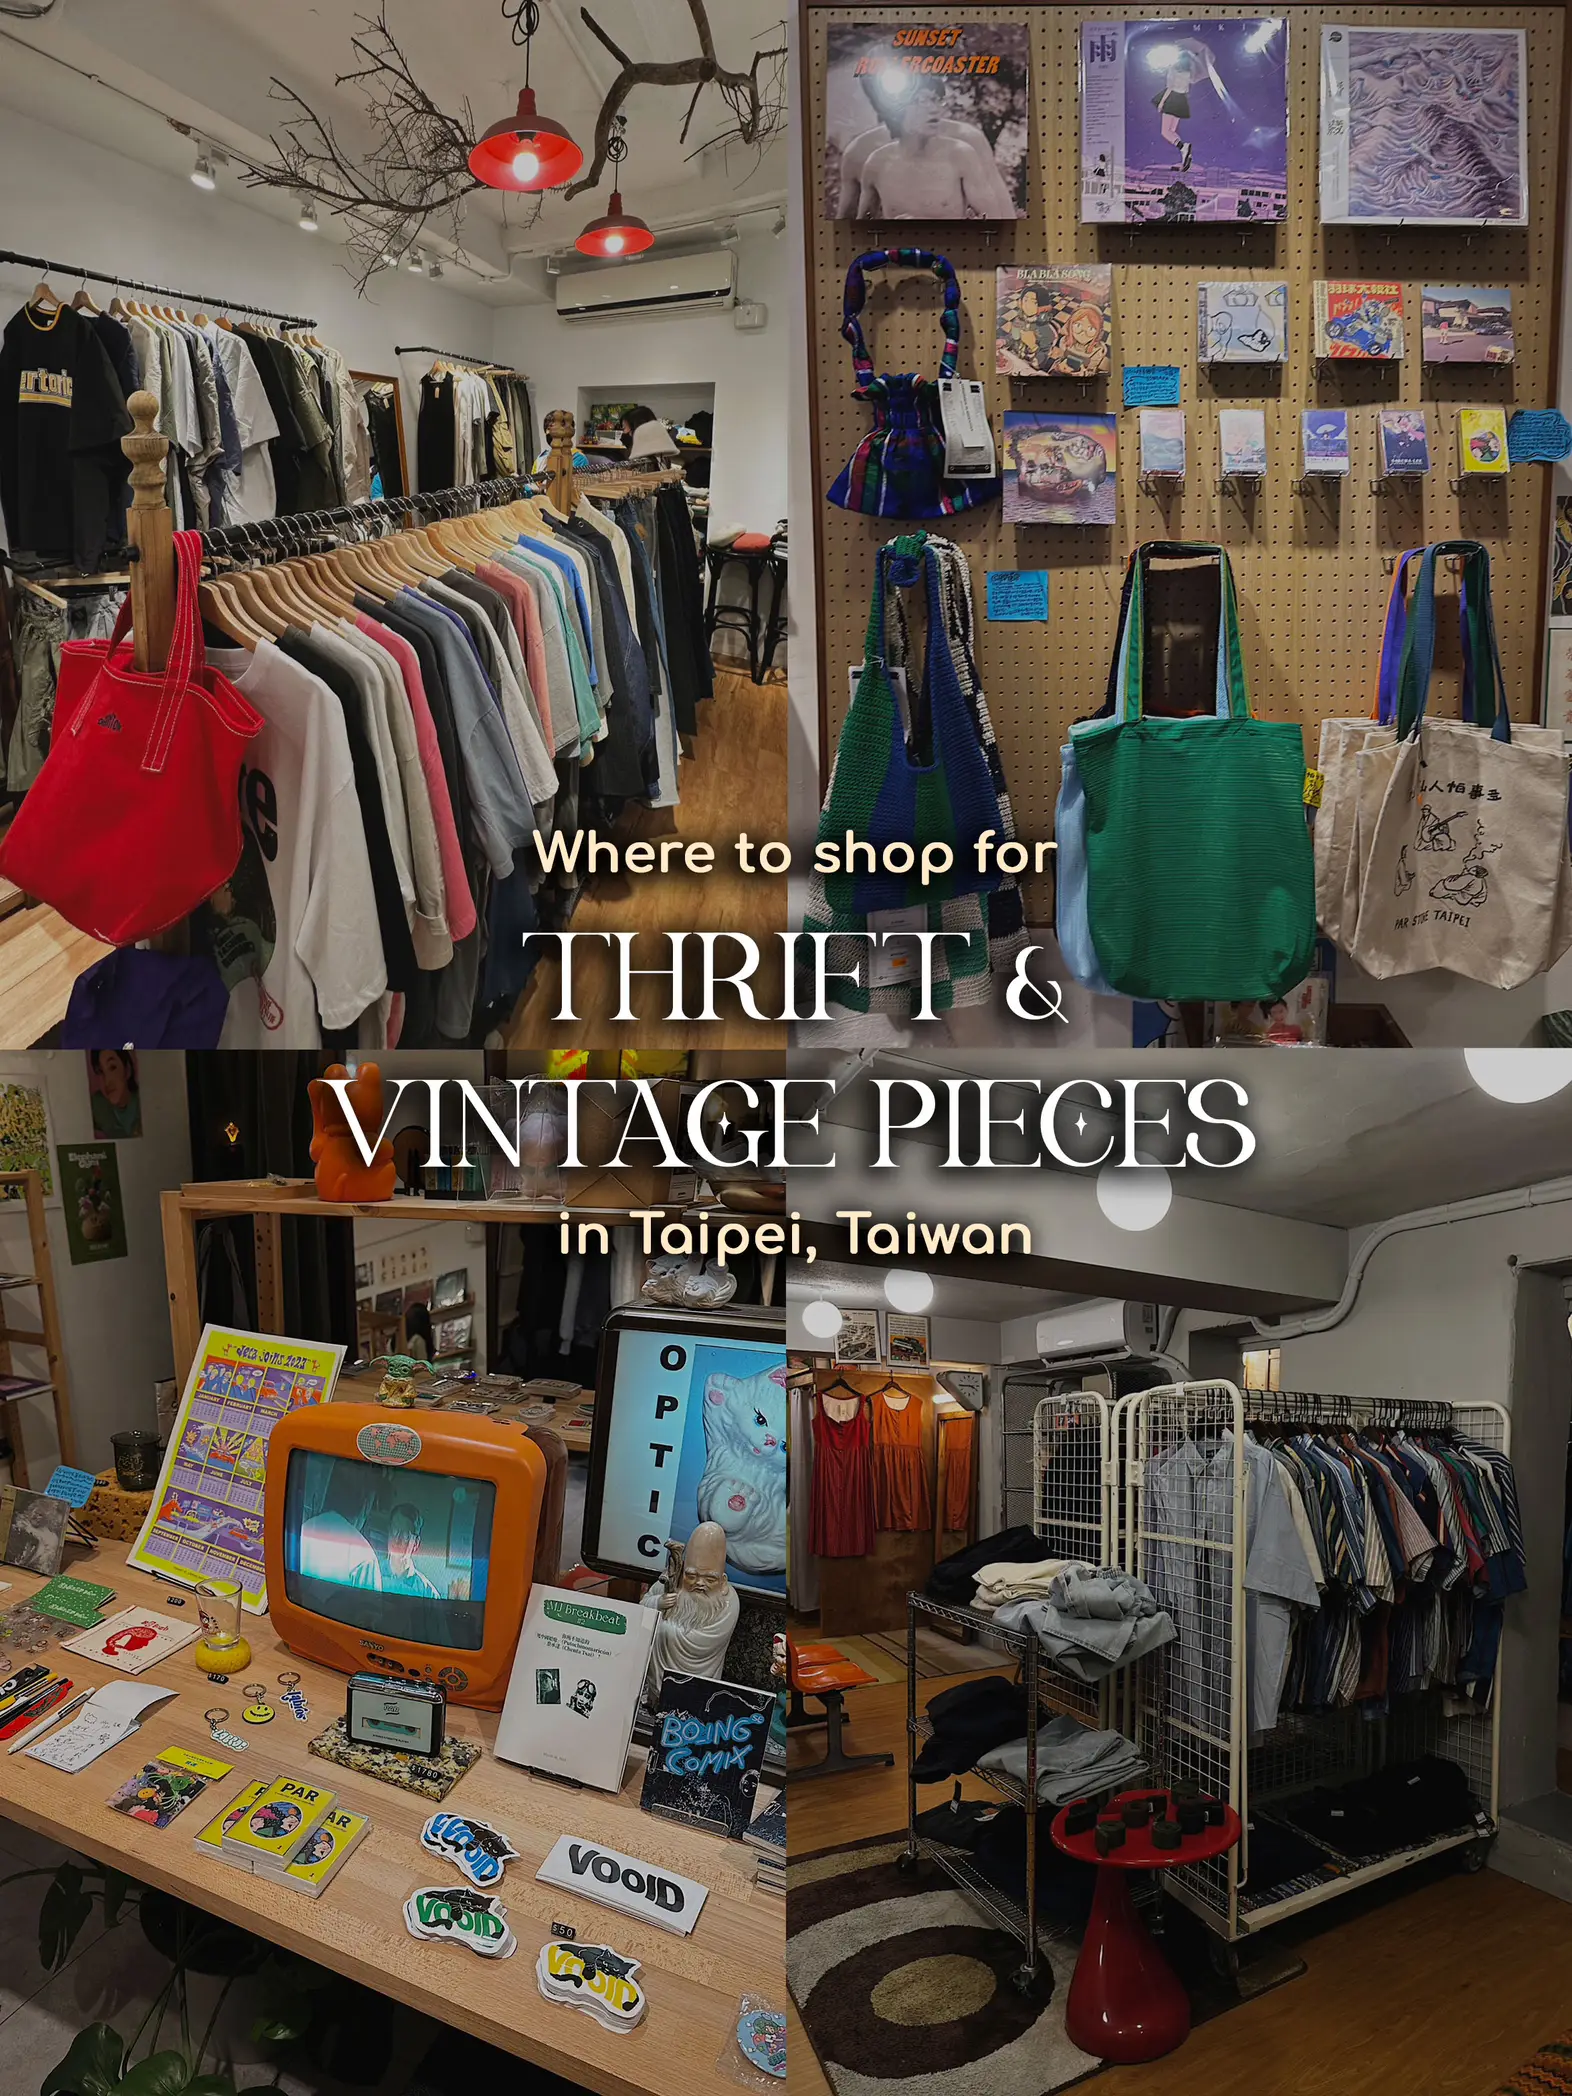 Hipster Area for Vintage/Thrift Shopping in Taipei's images